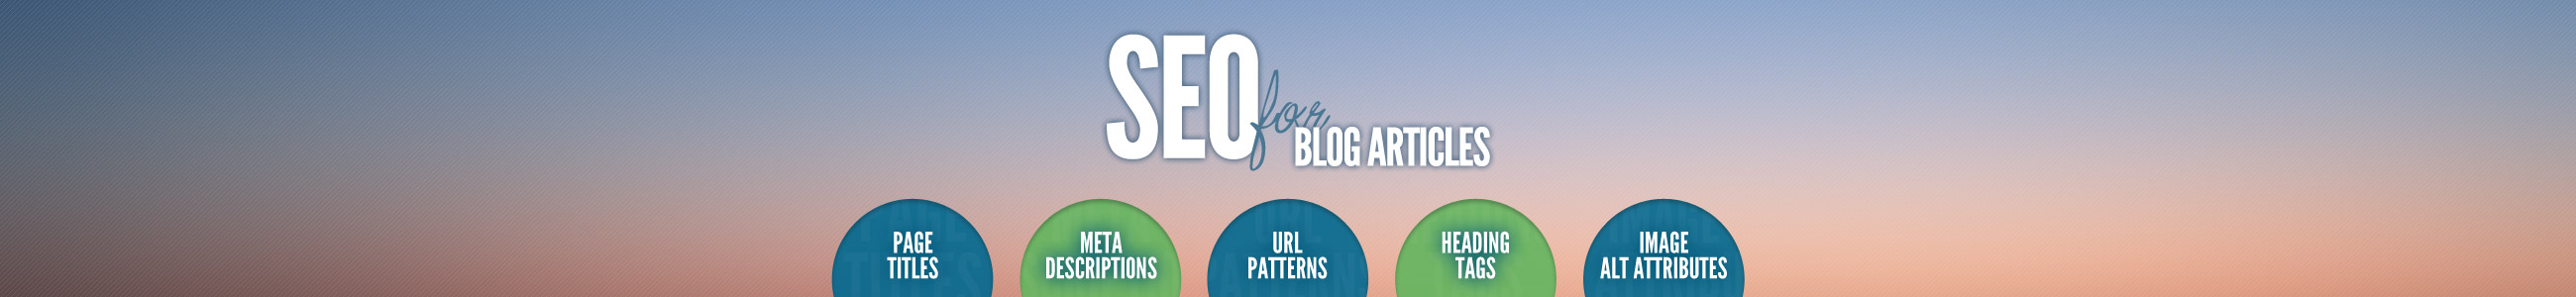 SEO (Search Engine Optimization) for Blog Articles